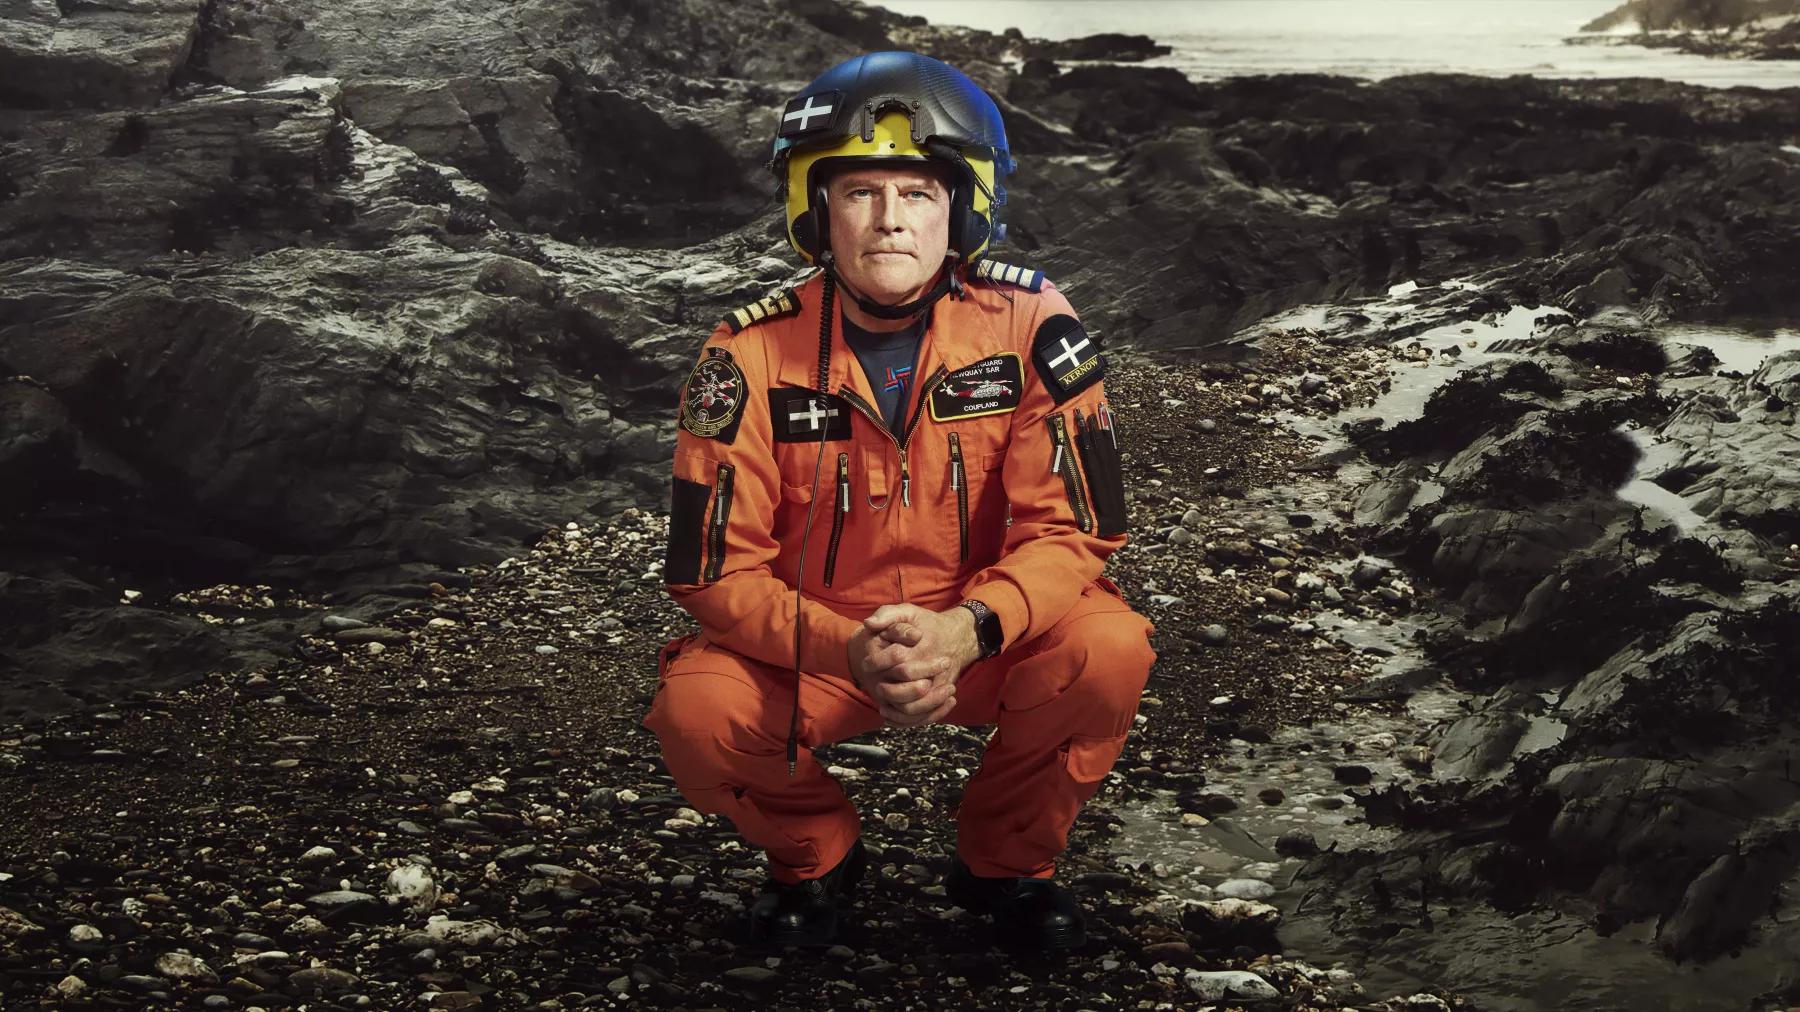 Crouched down helicopter crew member on rocky terrain in orange coveralls and helmet